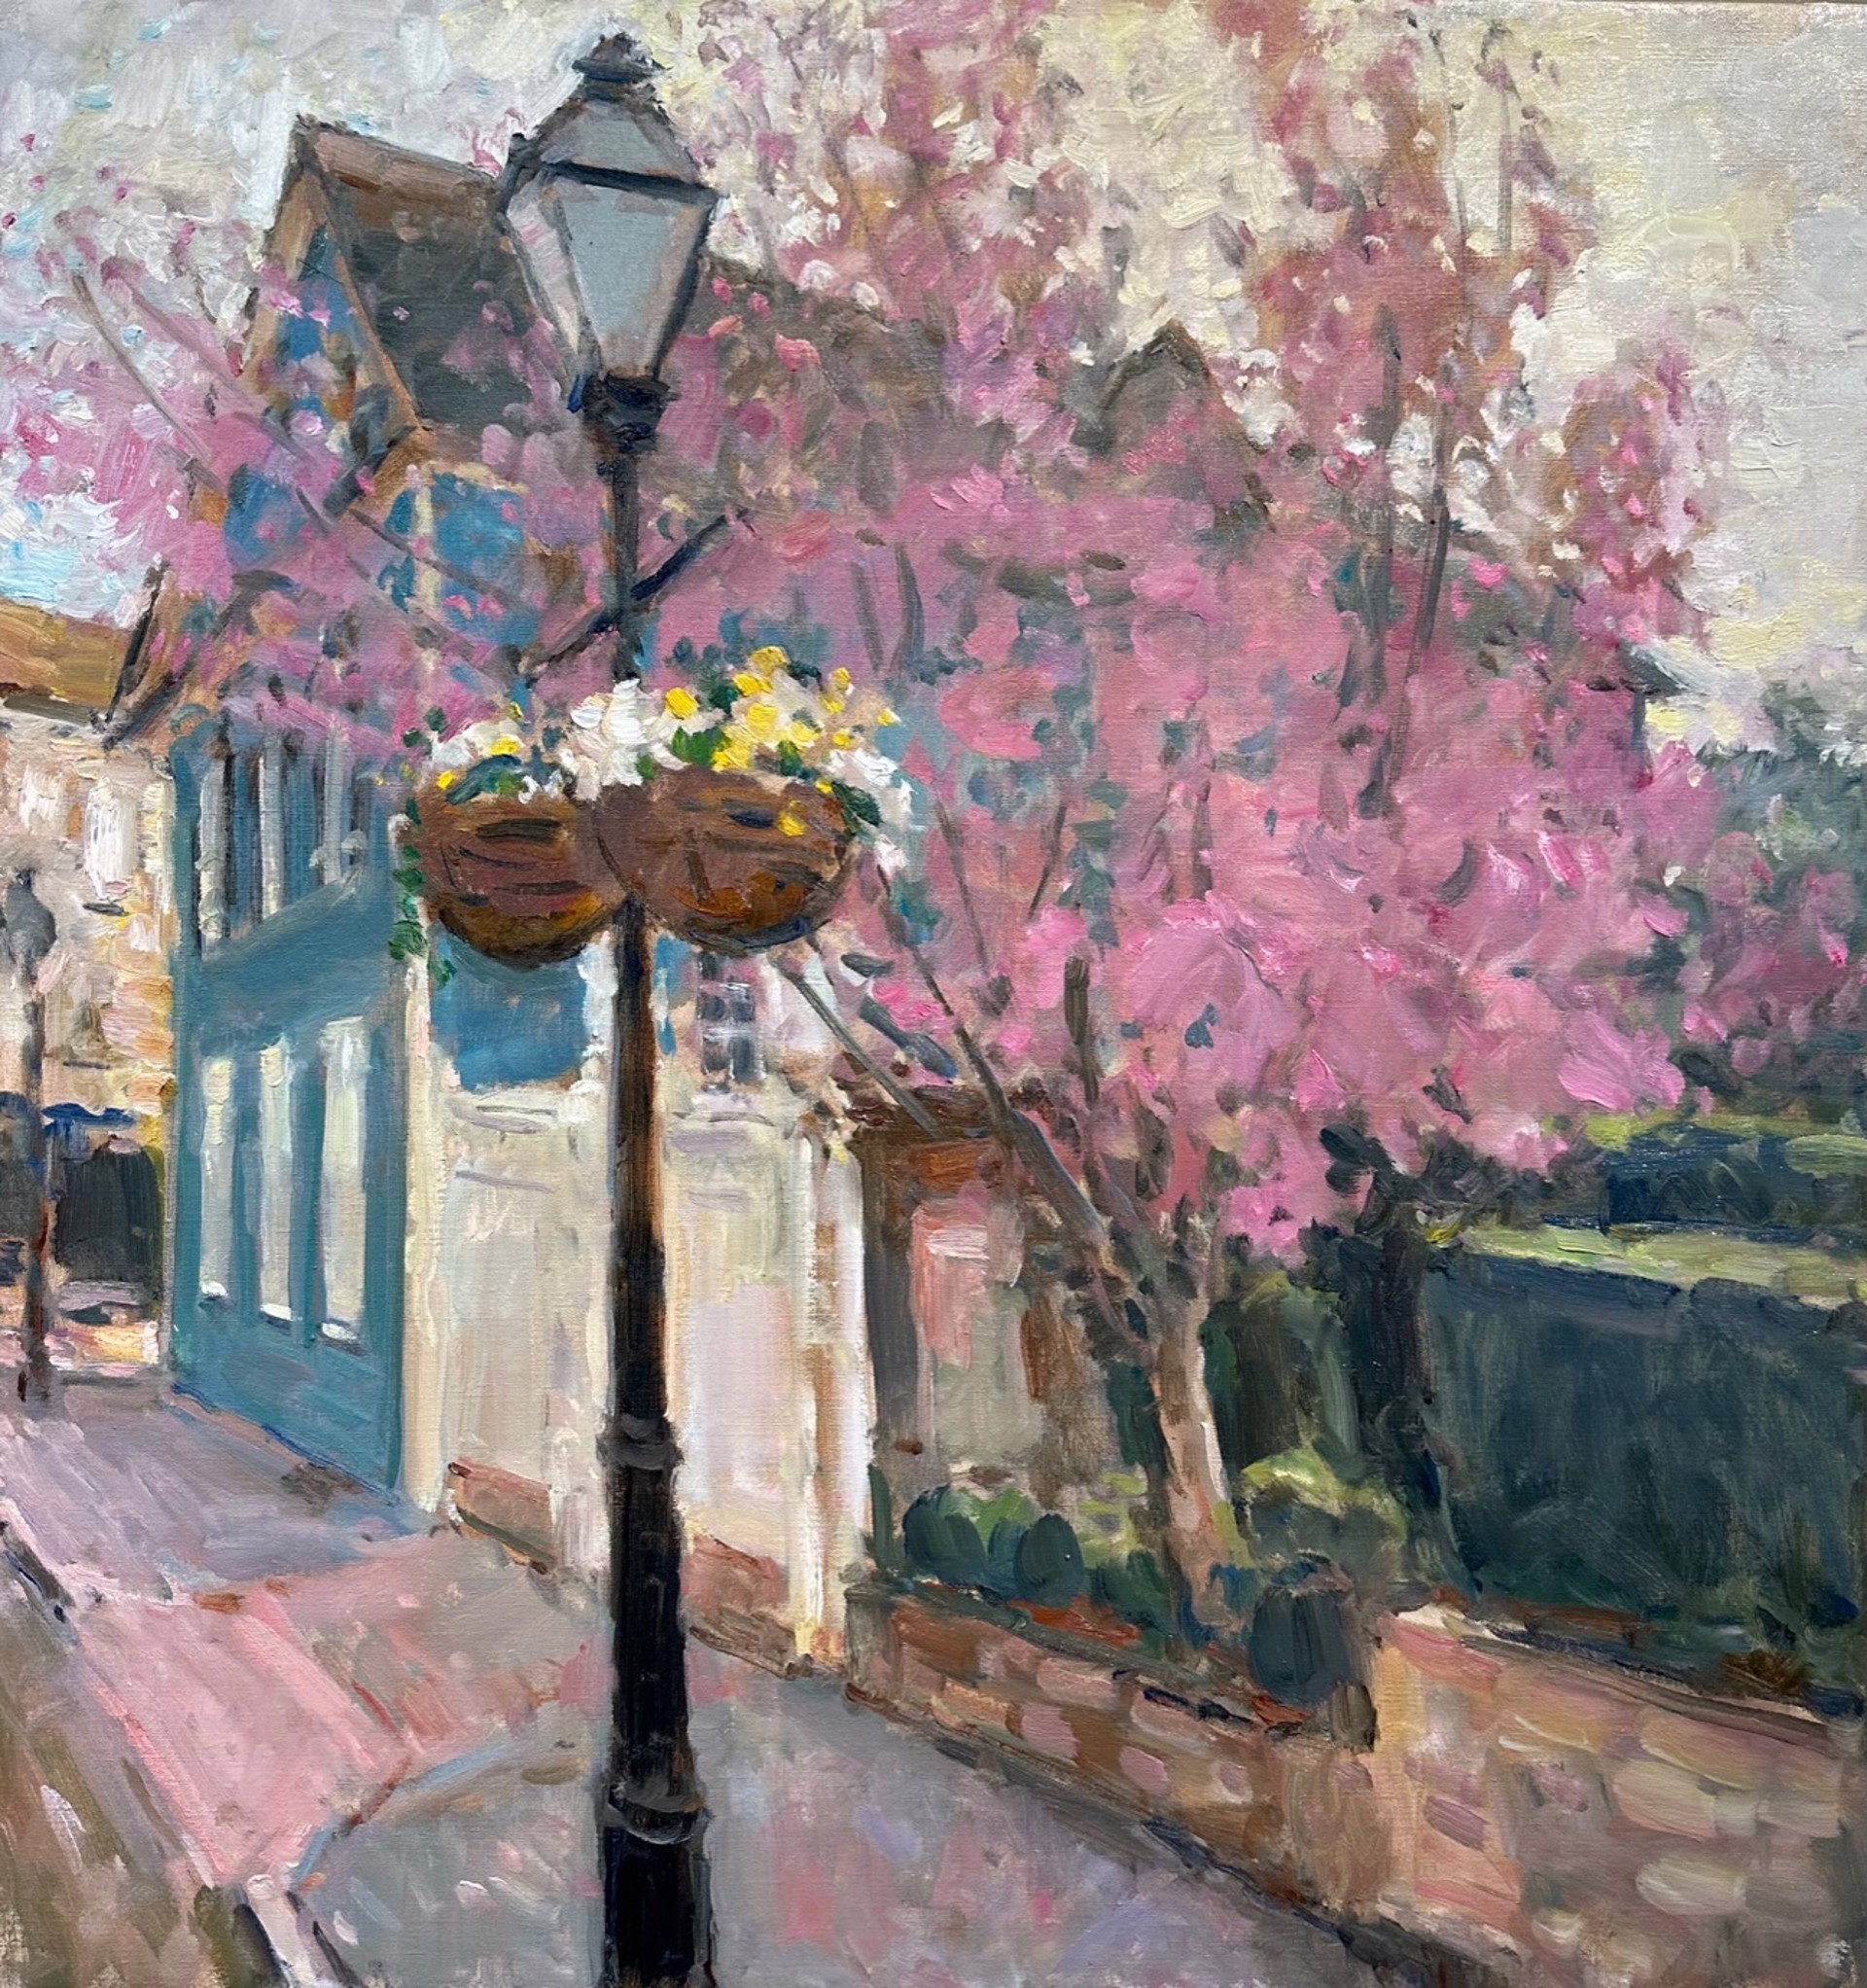 King and Broad in Spring by Richard Oversmith